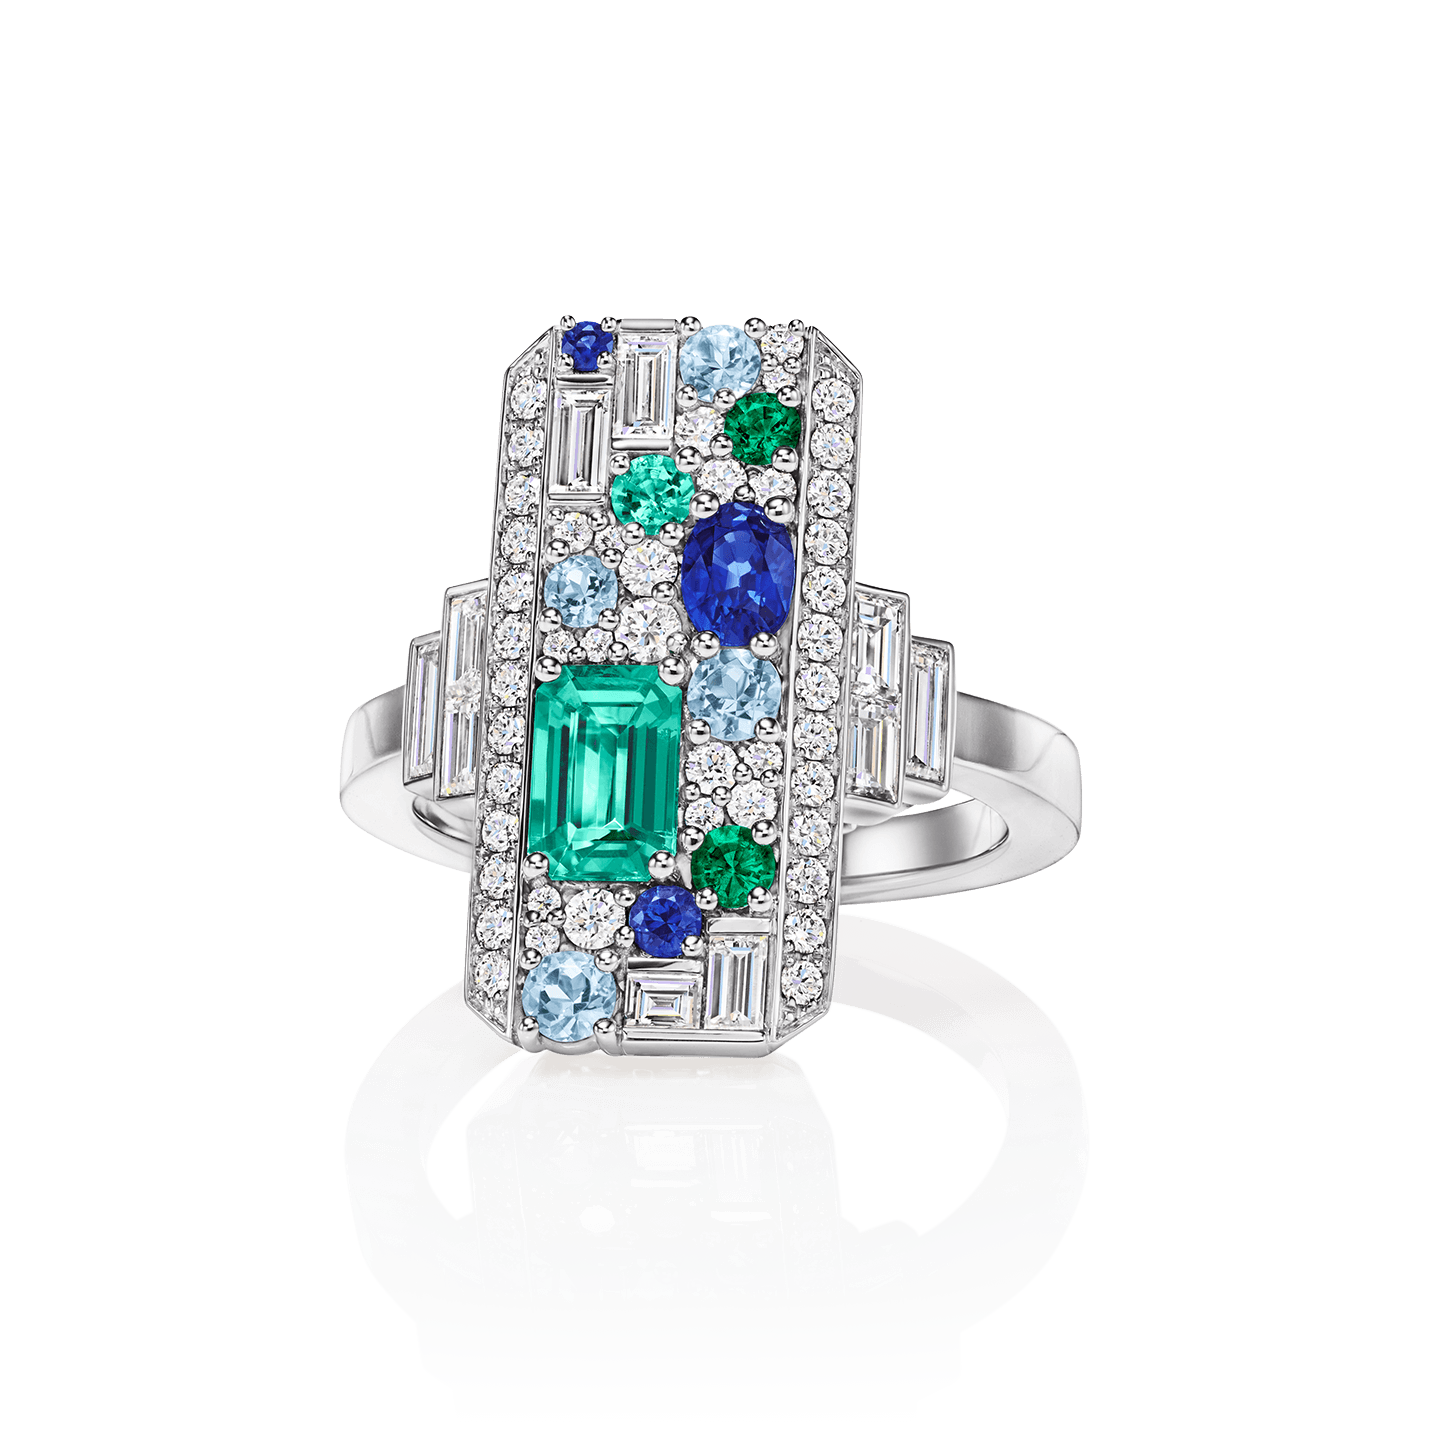 An octagonal ring featuring 3 round and oval-shaped sapphires, 4 round aquamarines, and 1 emerald-cut and 3 round emeralds weighing a total of approximately 1.05 carats with 54 square-cut, baguette and round brilliant diamonds set in platinum
